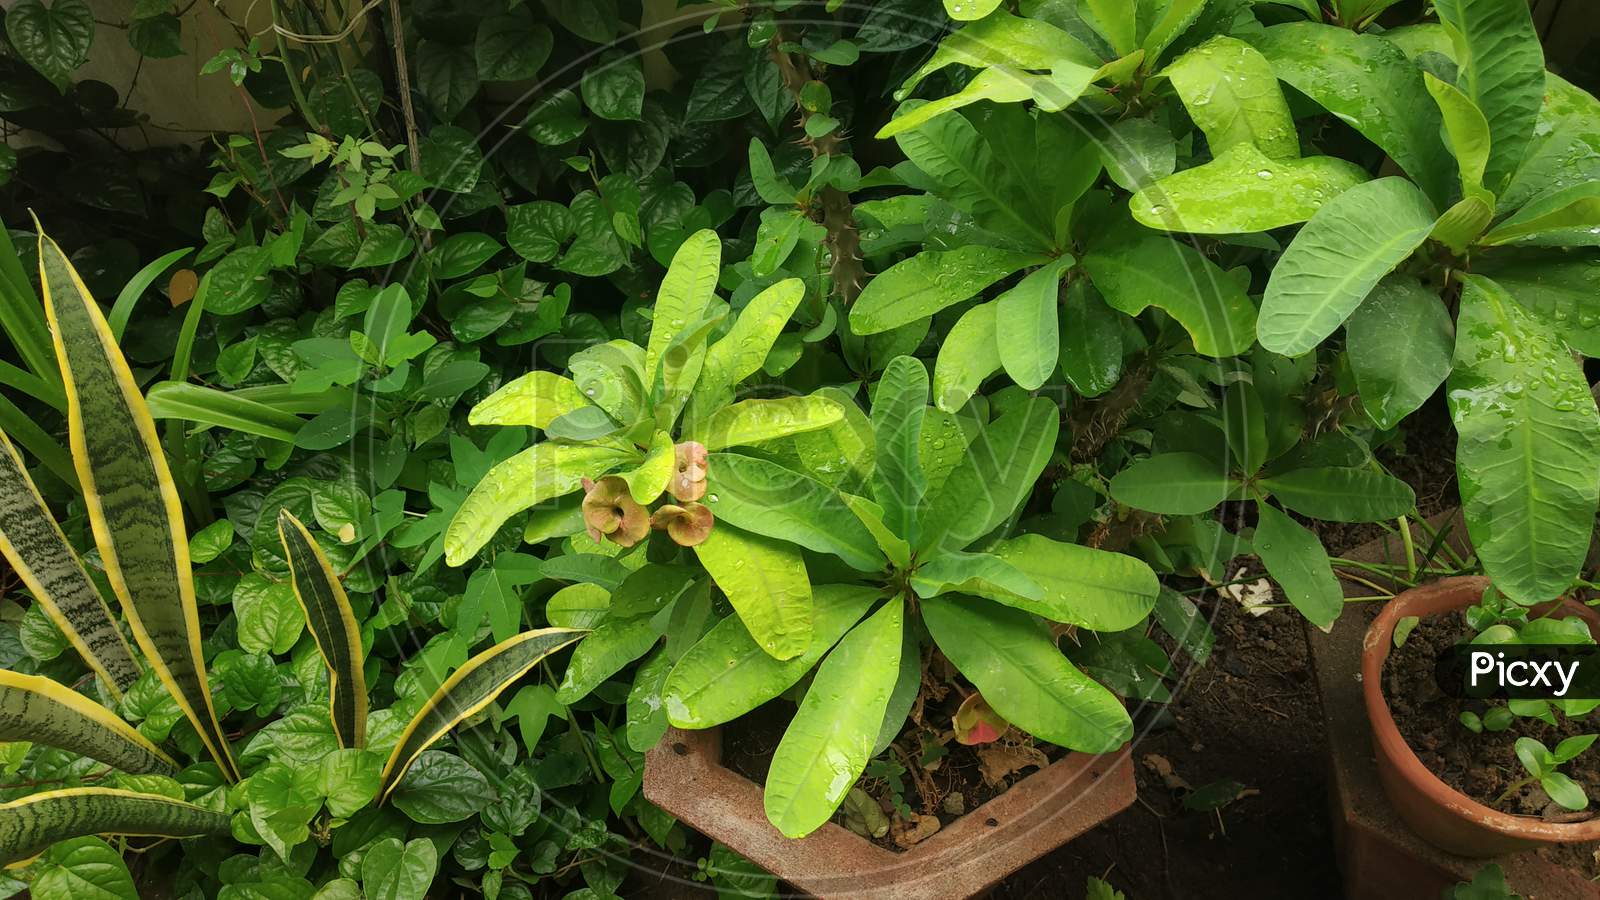 Green And Yellow Leaves Of Showcase Plant In Monsoon Season With Dewdrops On It